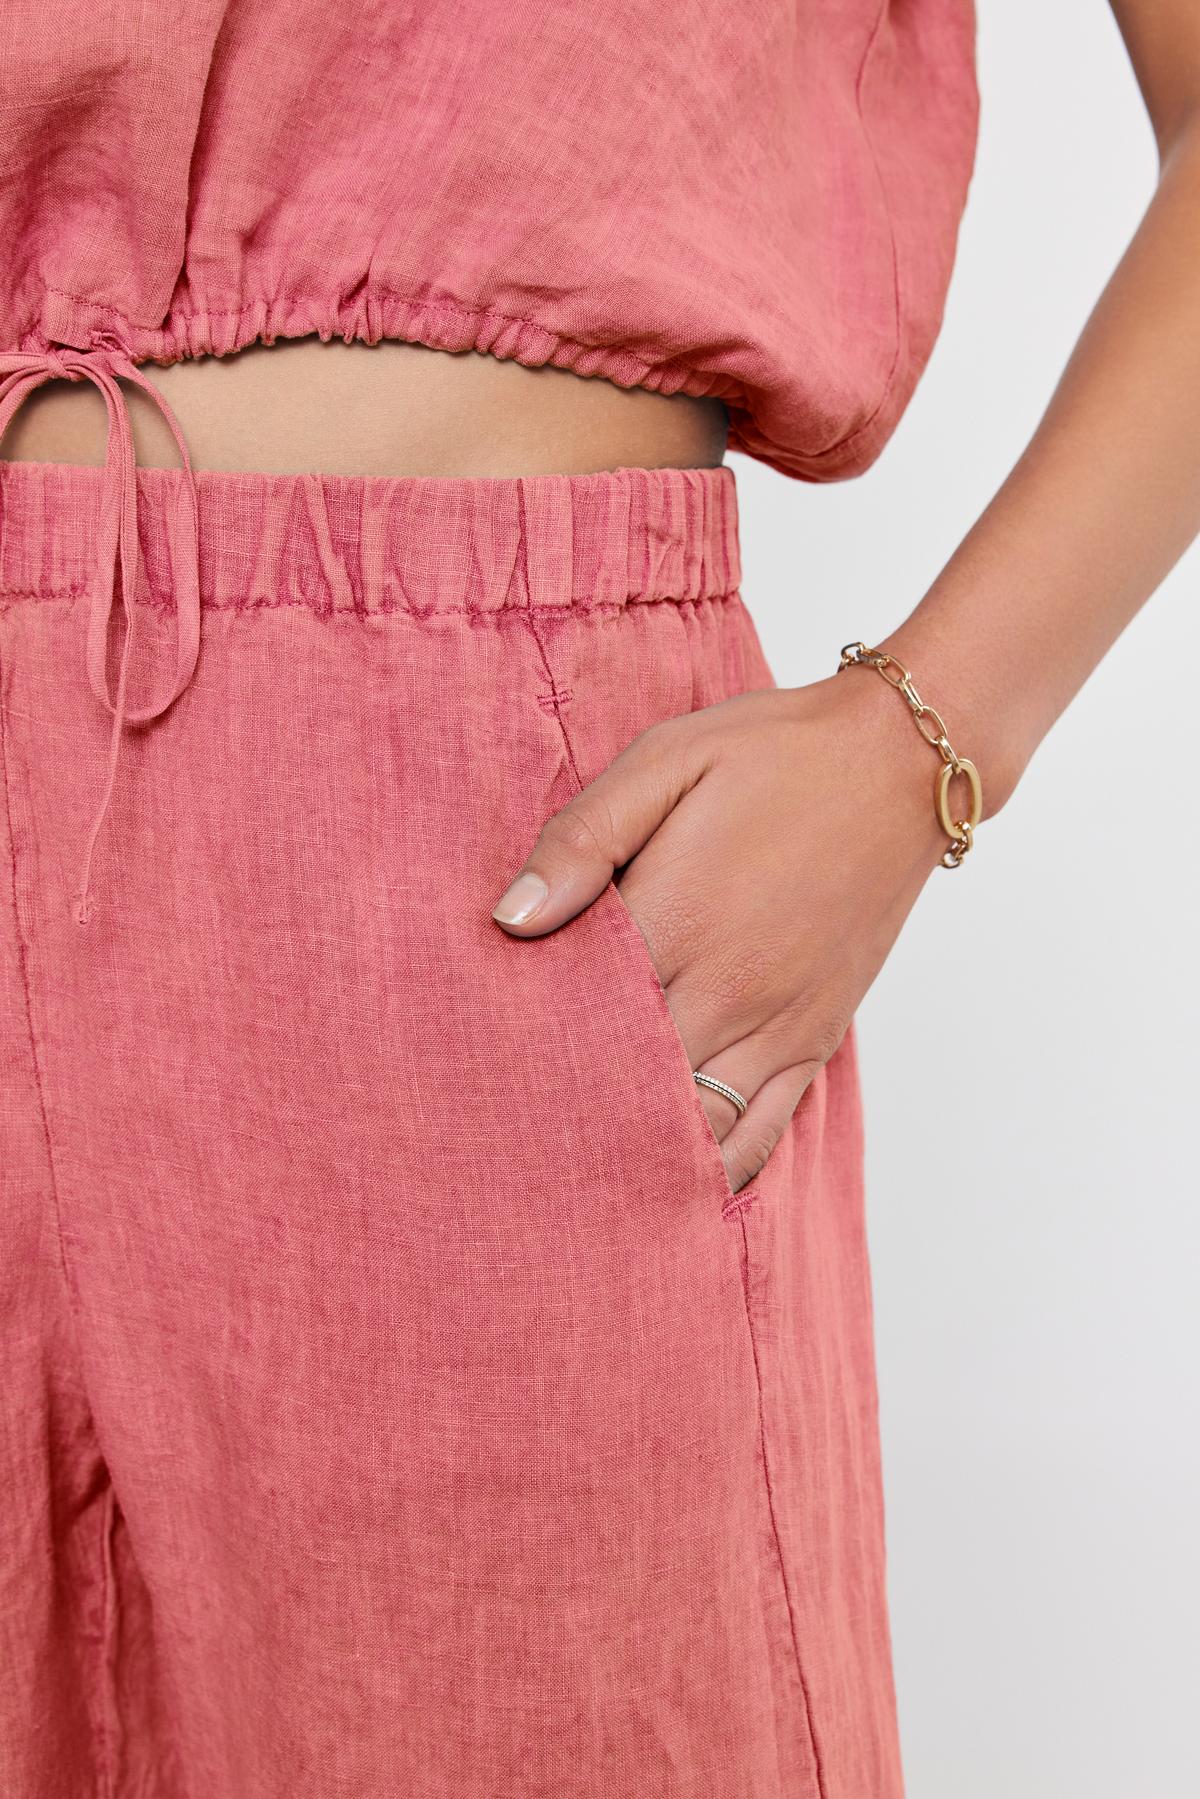 A person wearing a pink outfit with Velvet by Graham & Spencer's LOLA LINEN PANTs that feature a drawstring waist holds their right hand in their pocket, showing a gold bracelet and a ring on the same hand.-36943740698817